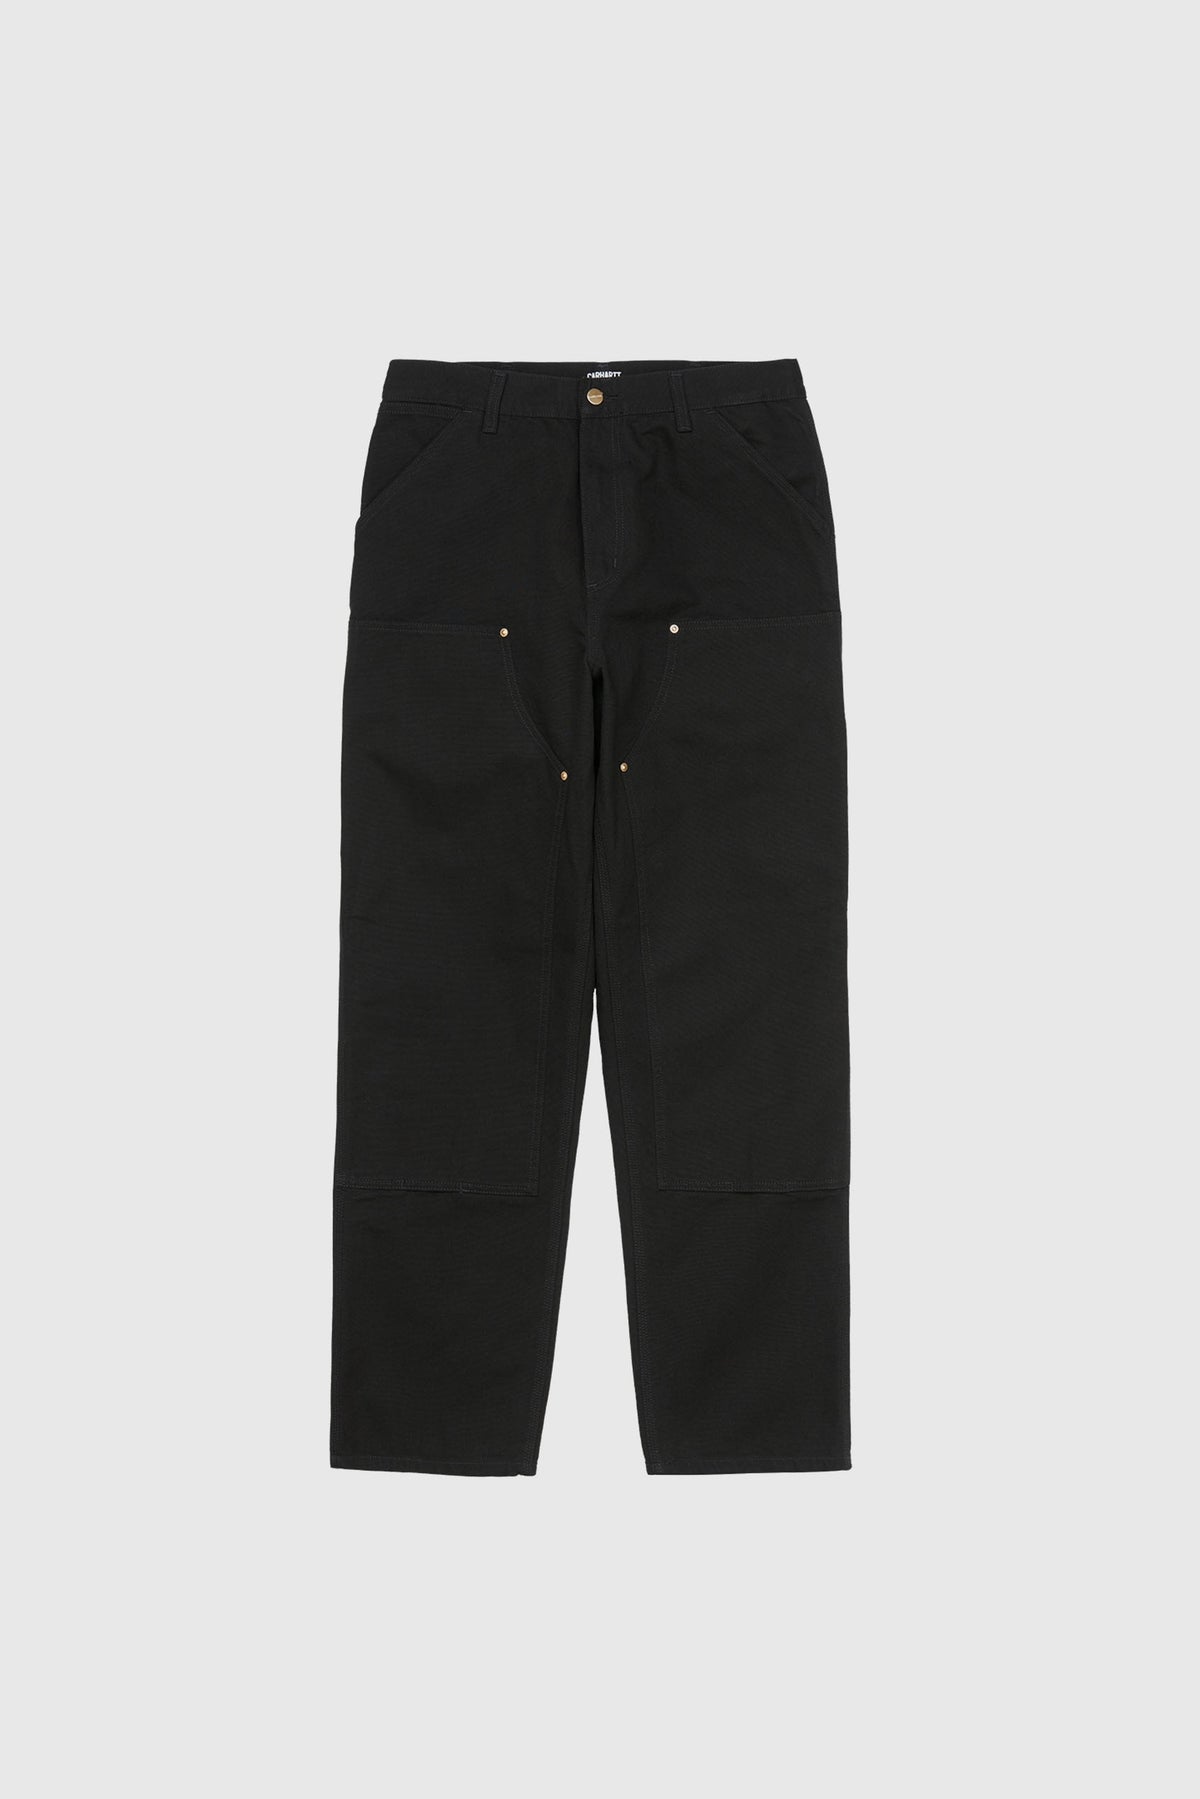 Carhartt WIP Relaxed Tapered Mens Trousers  Black Rinsed  JEANSTORE